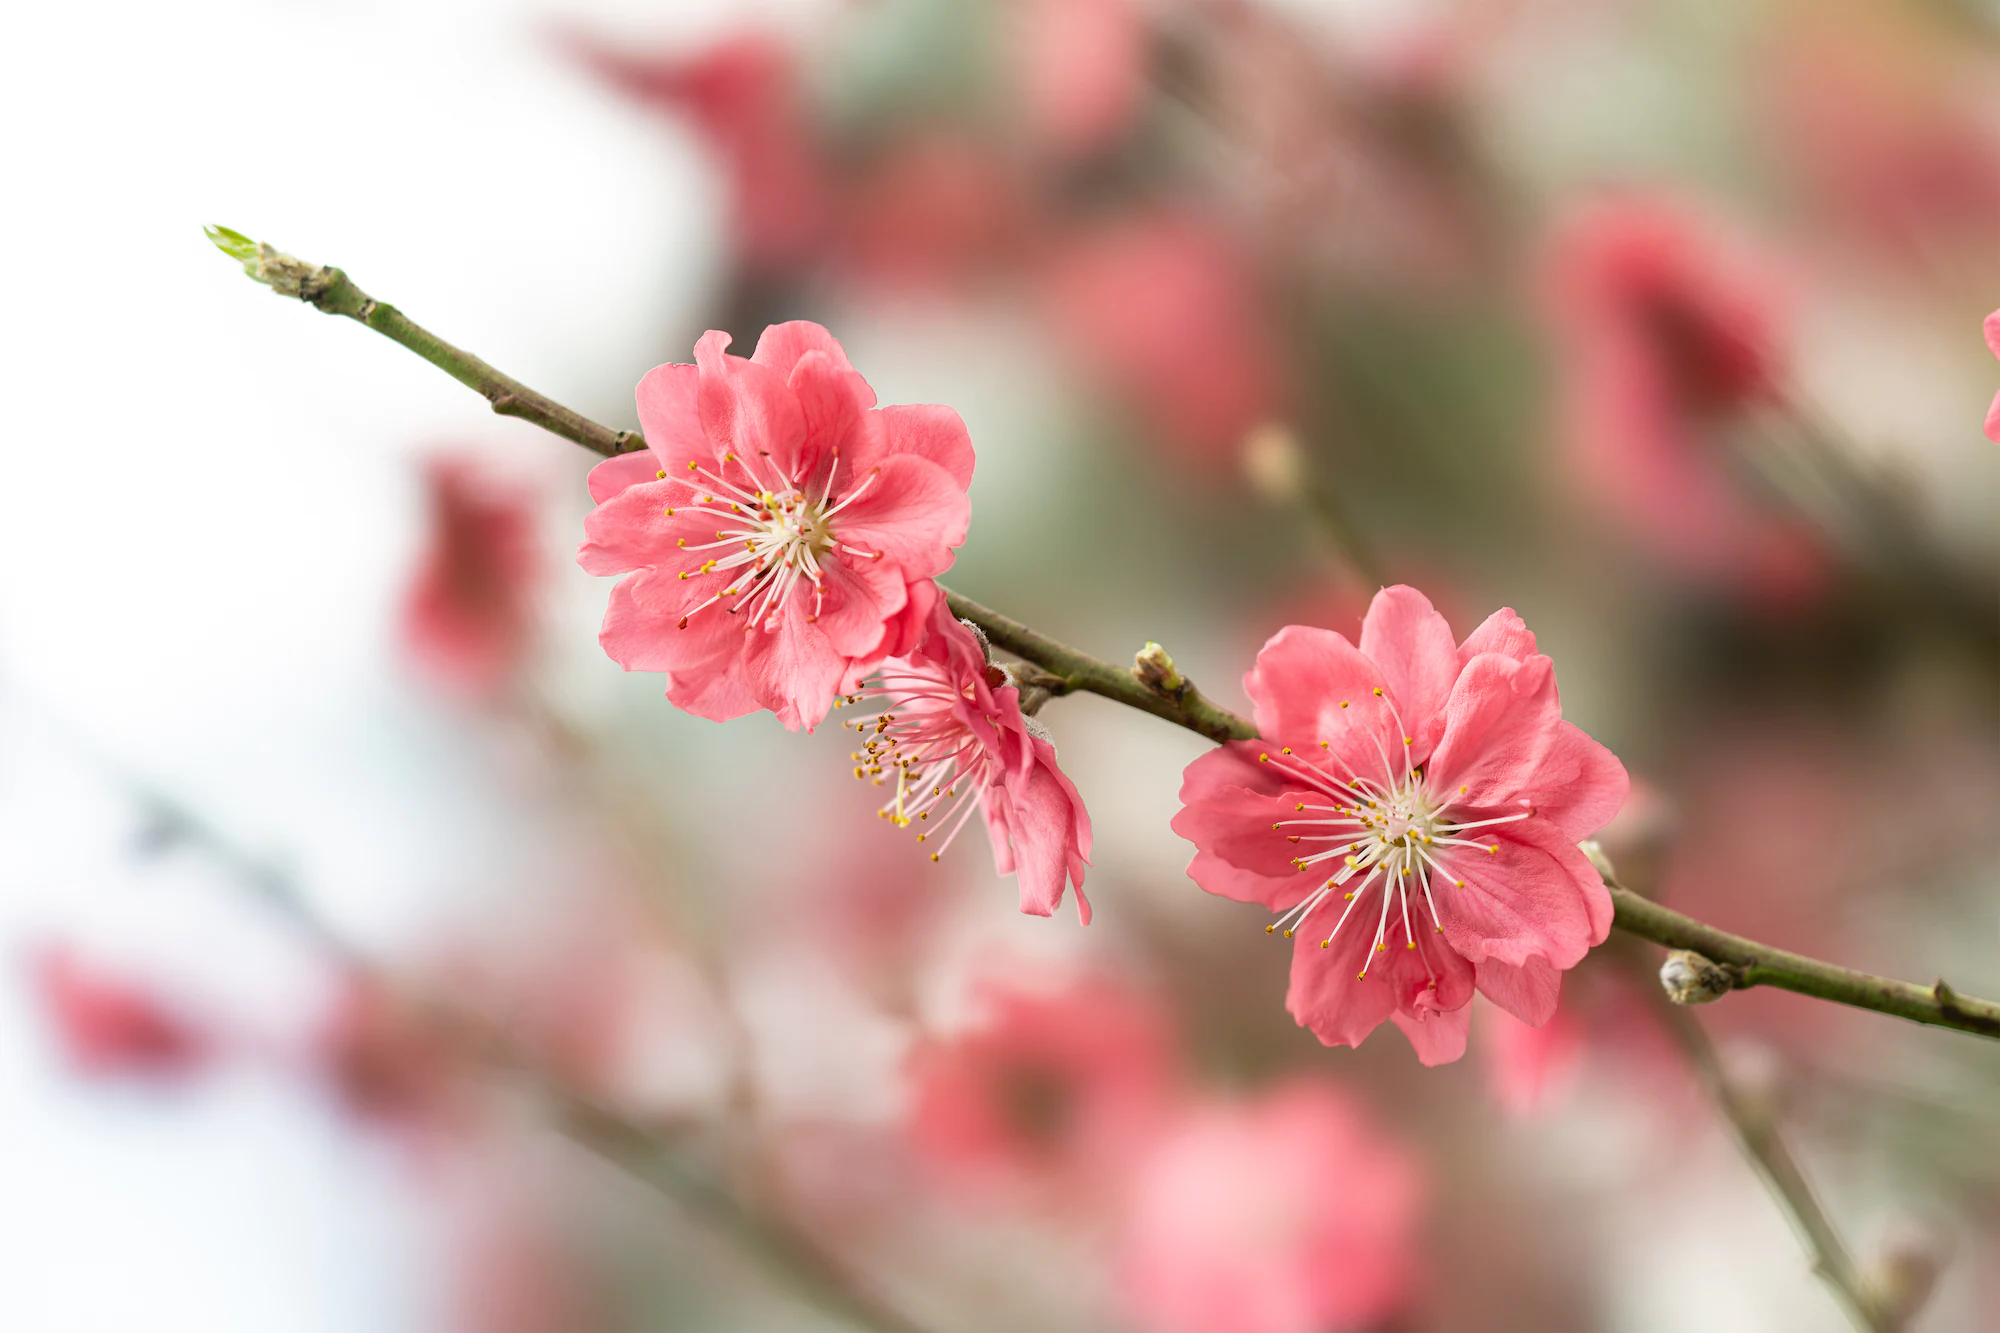 The SEL100F28GM offers smooth bokeh and a close focusing mode for beautiful floral close-up